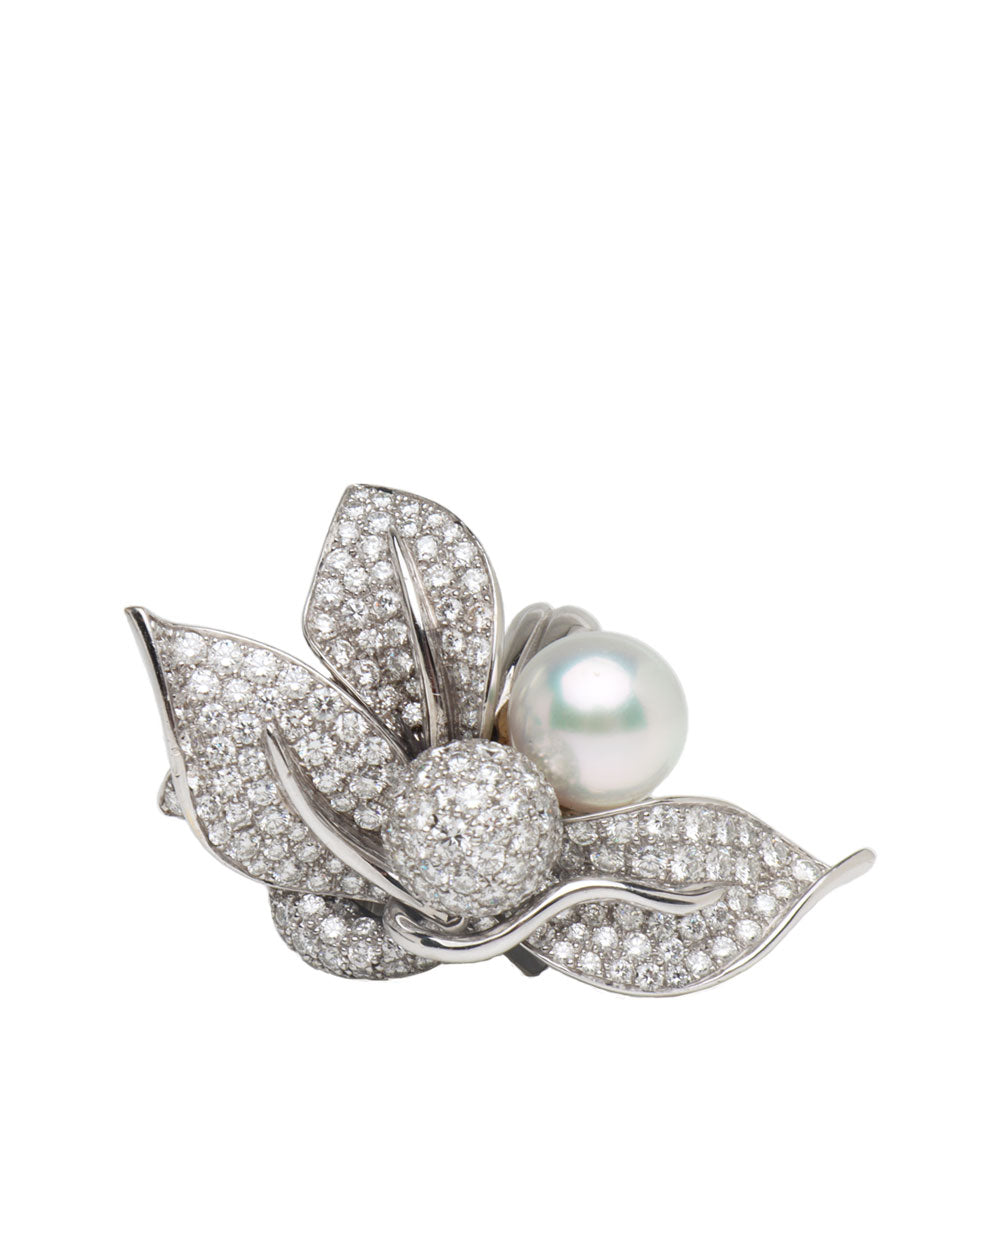 Feedebois Diamond and Pearl Ring